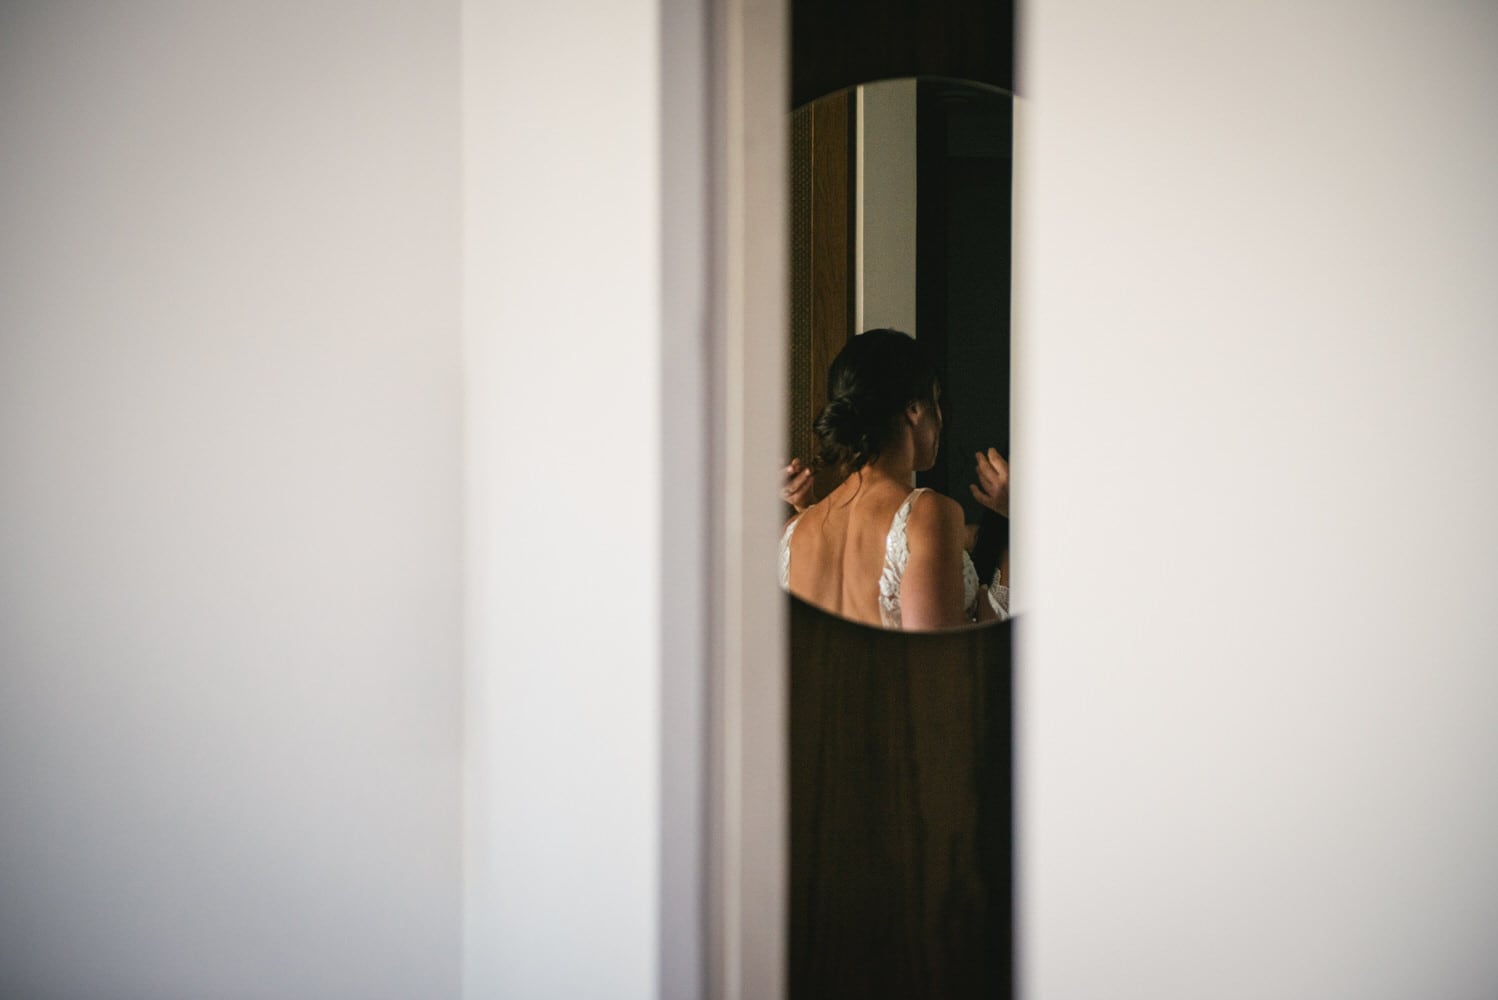 Details of the bride putting on her dress, elegance for their Corfu elopement.